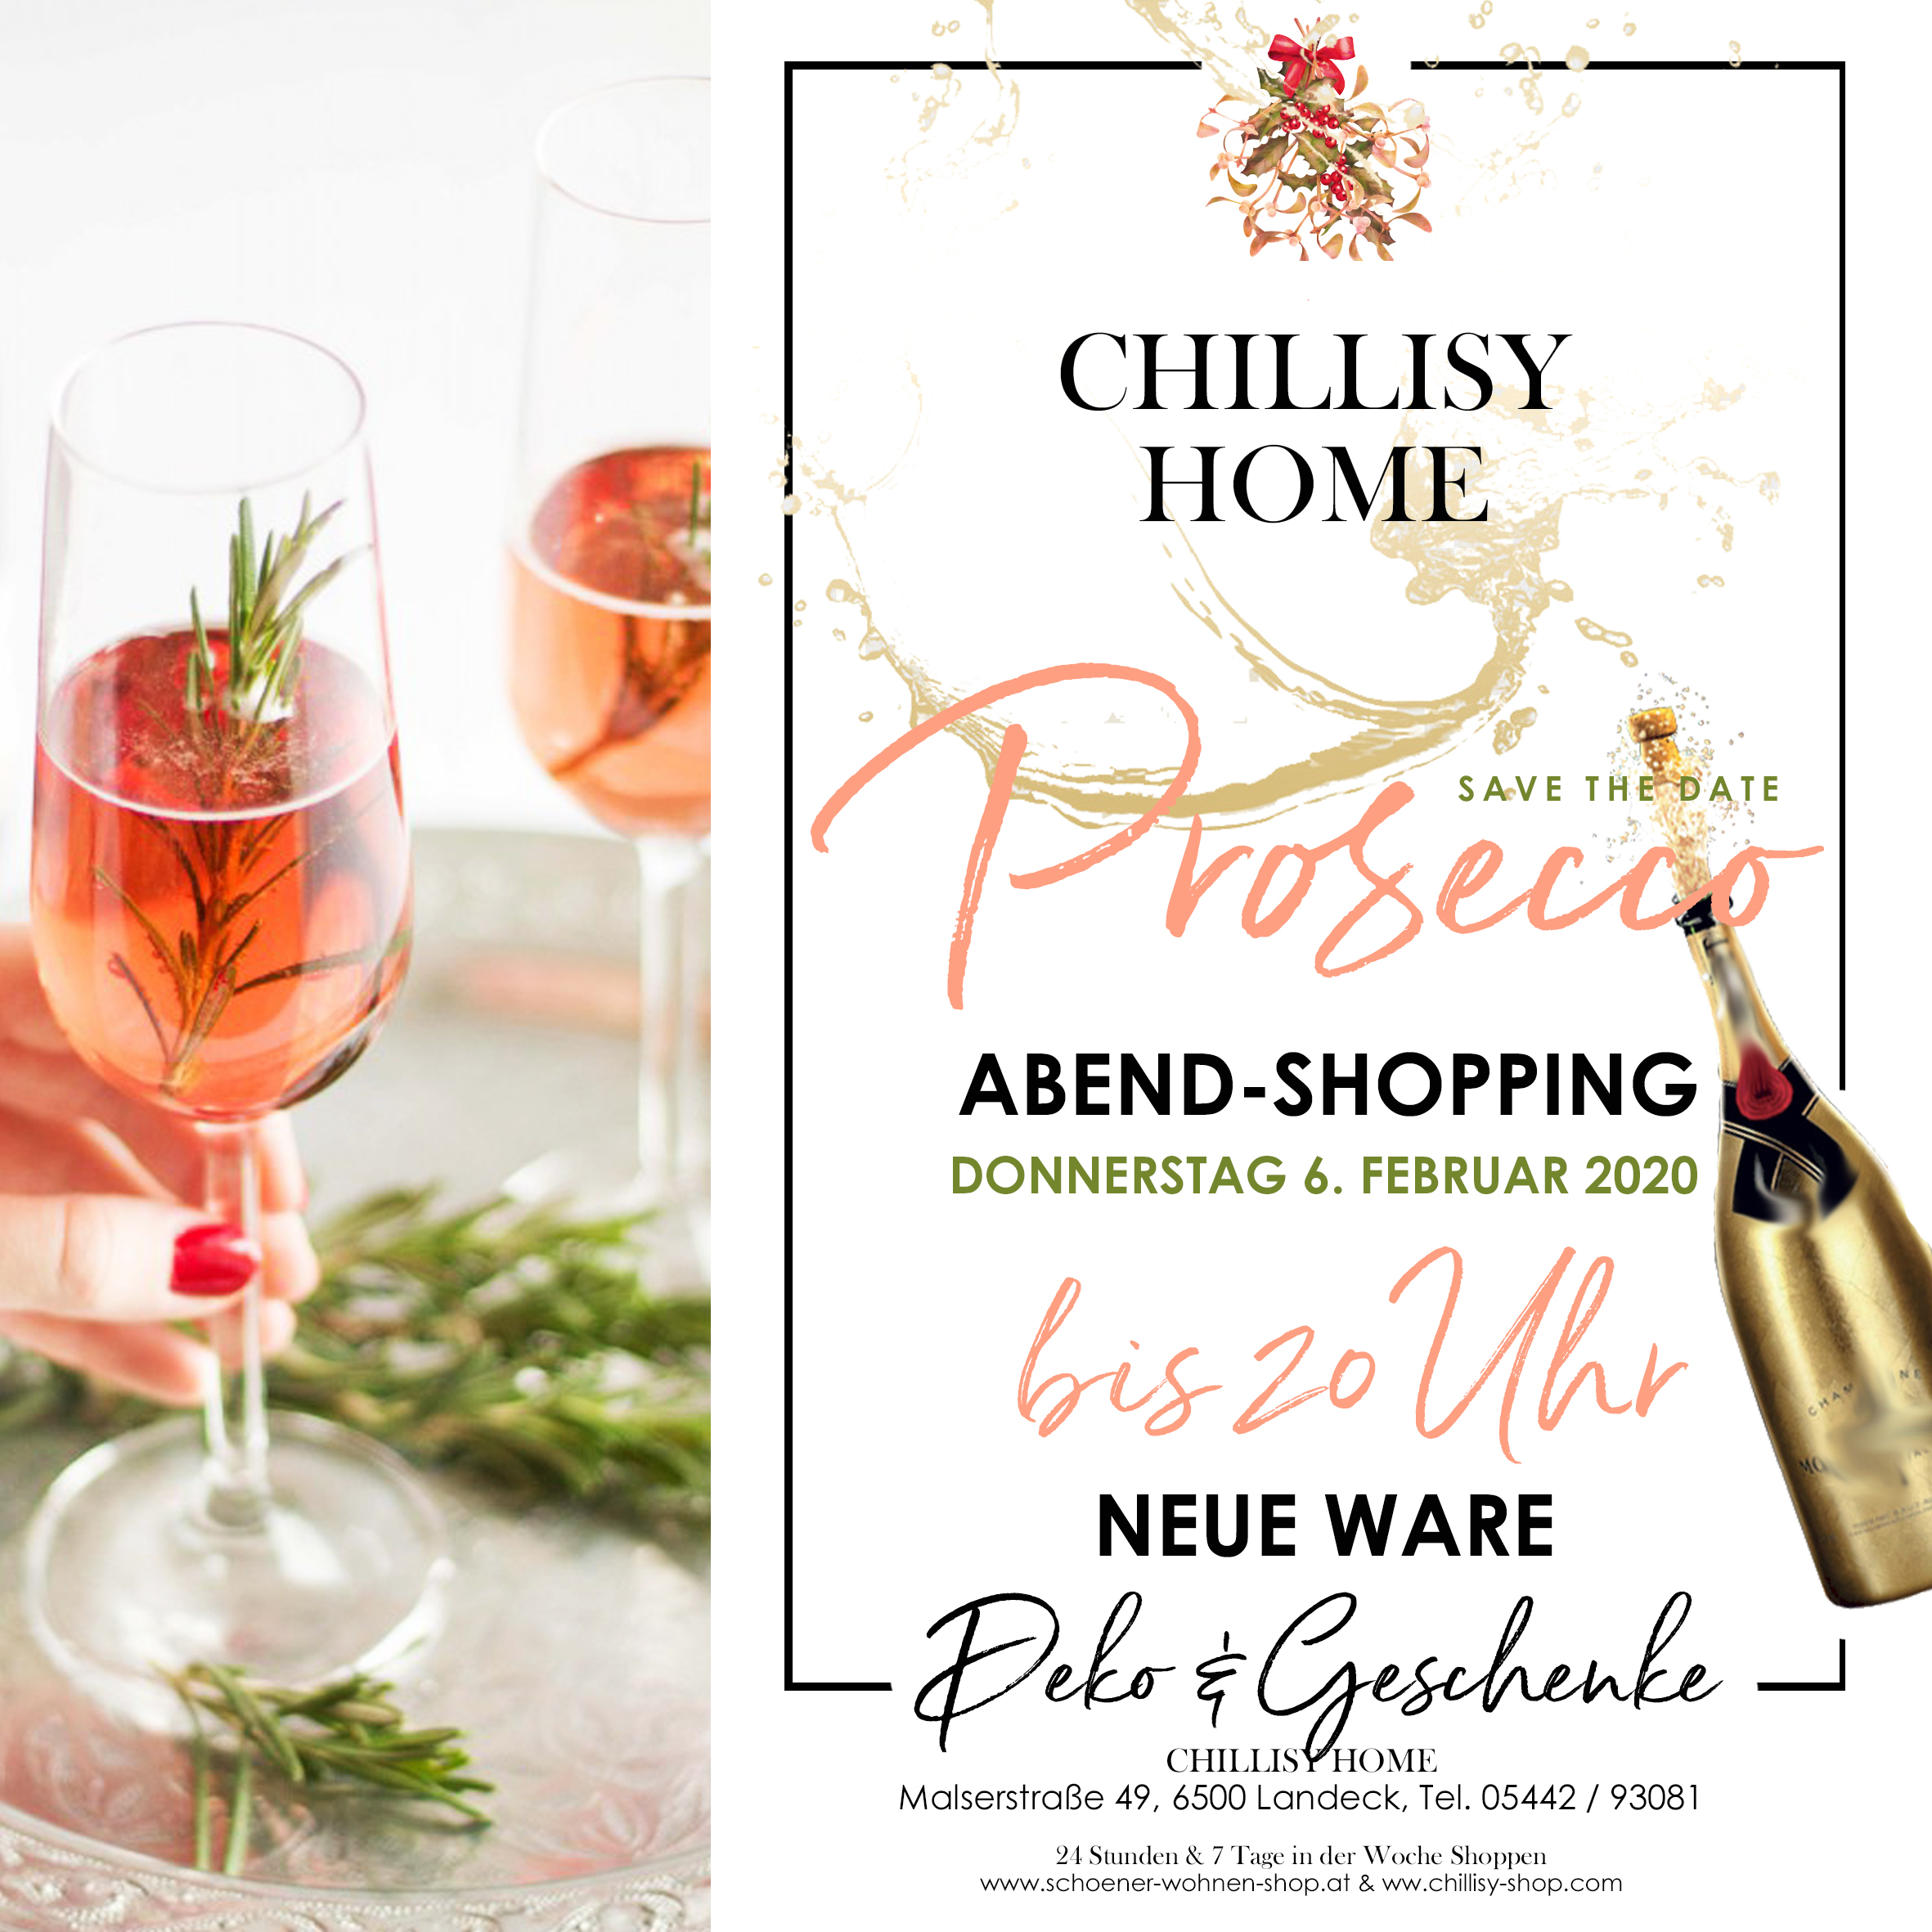 chillisy-home-abend-prosecco-shopping-2020-02-06.jpg